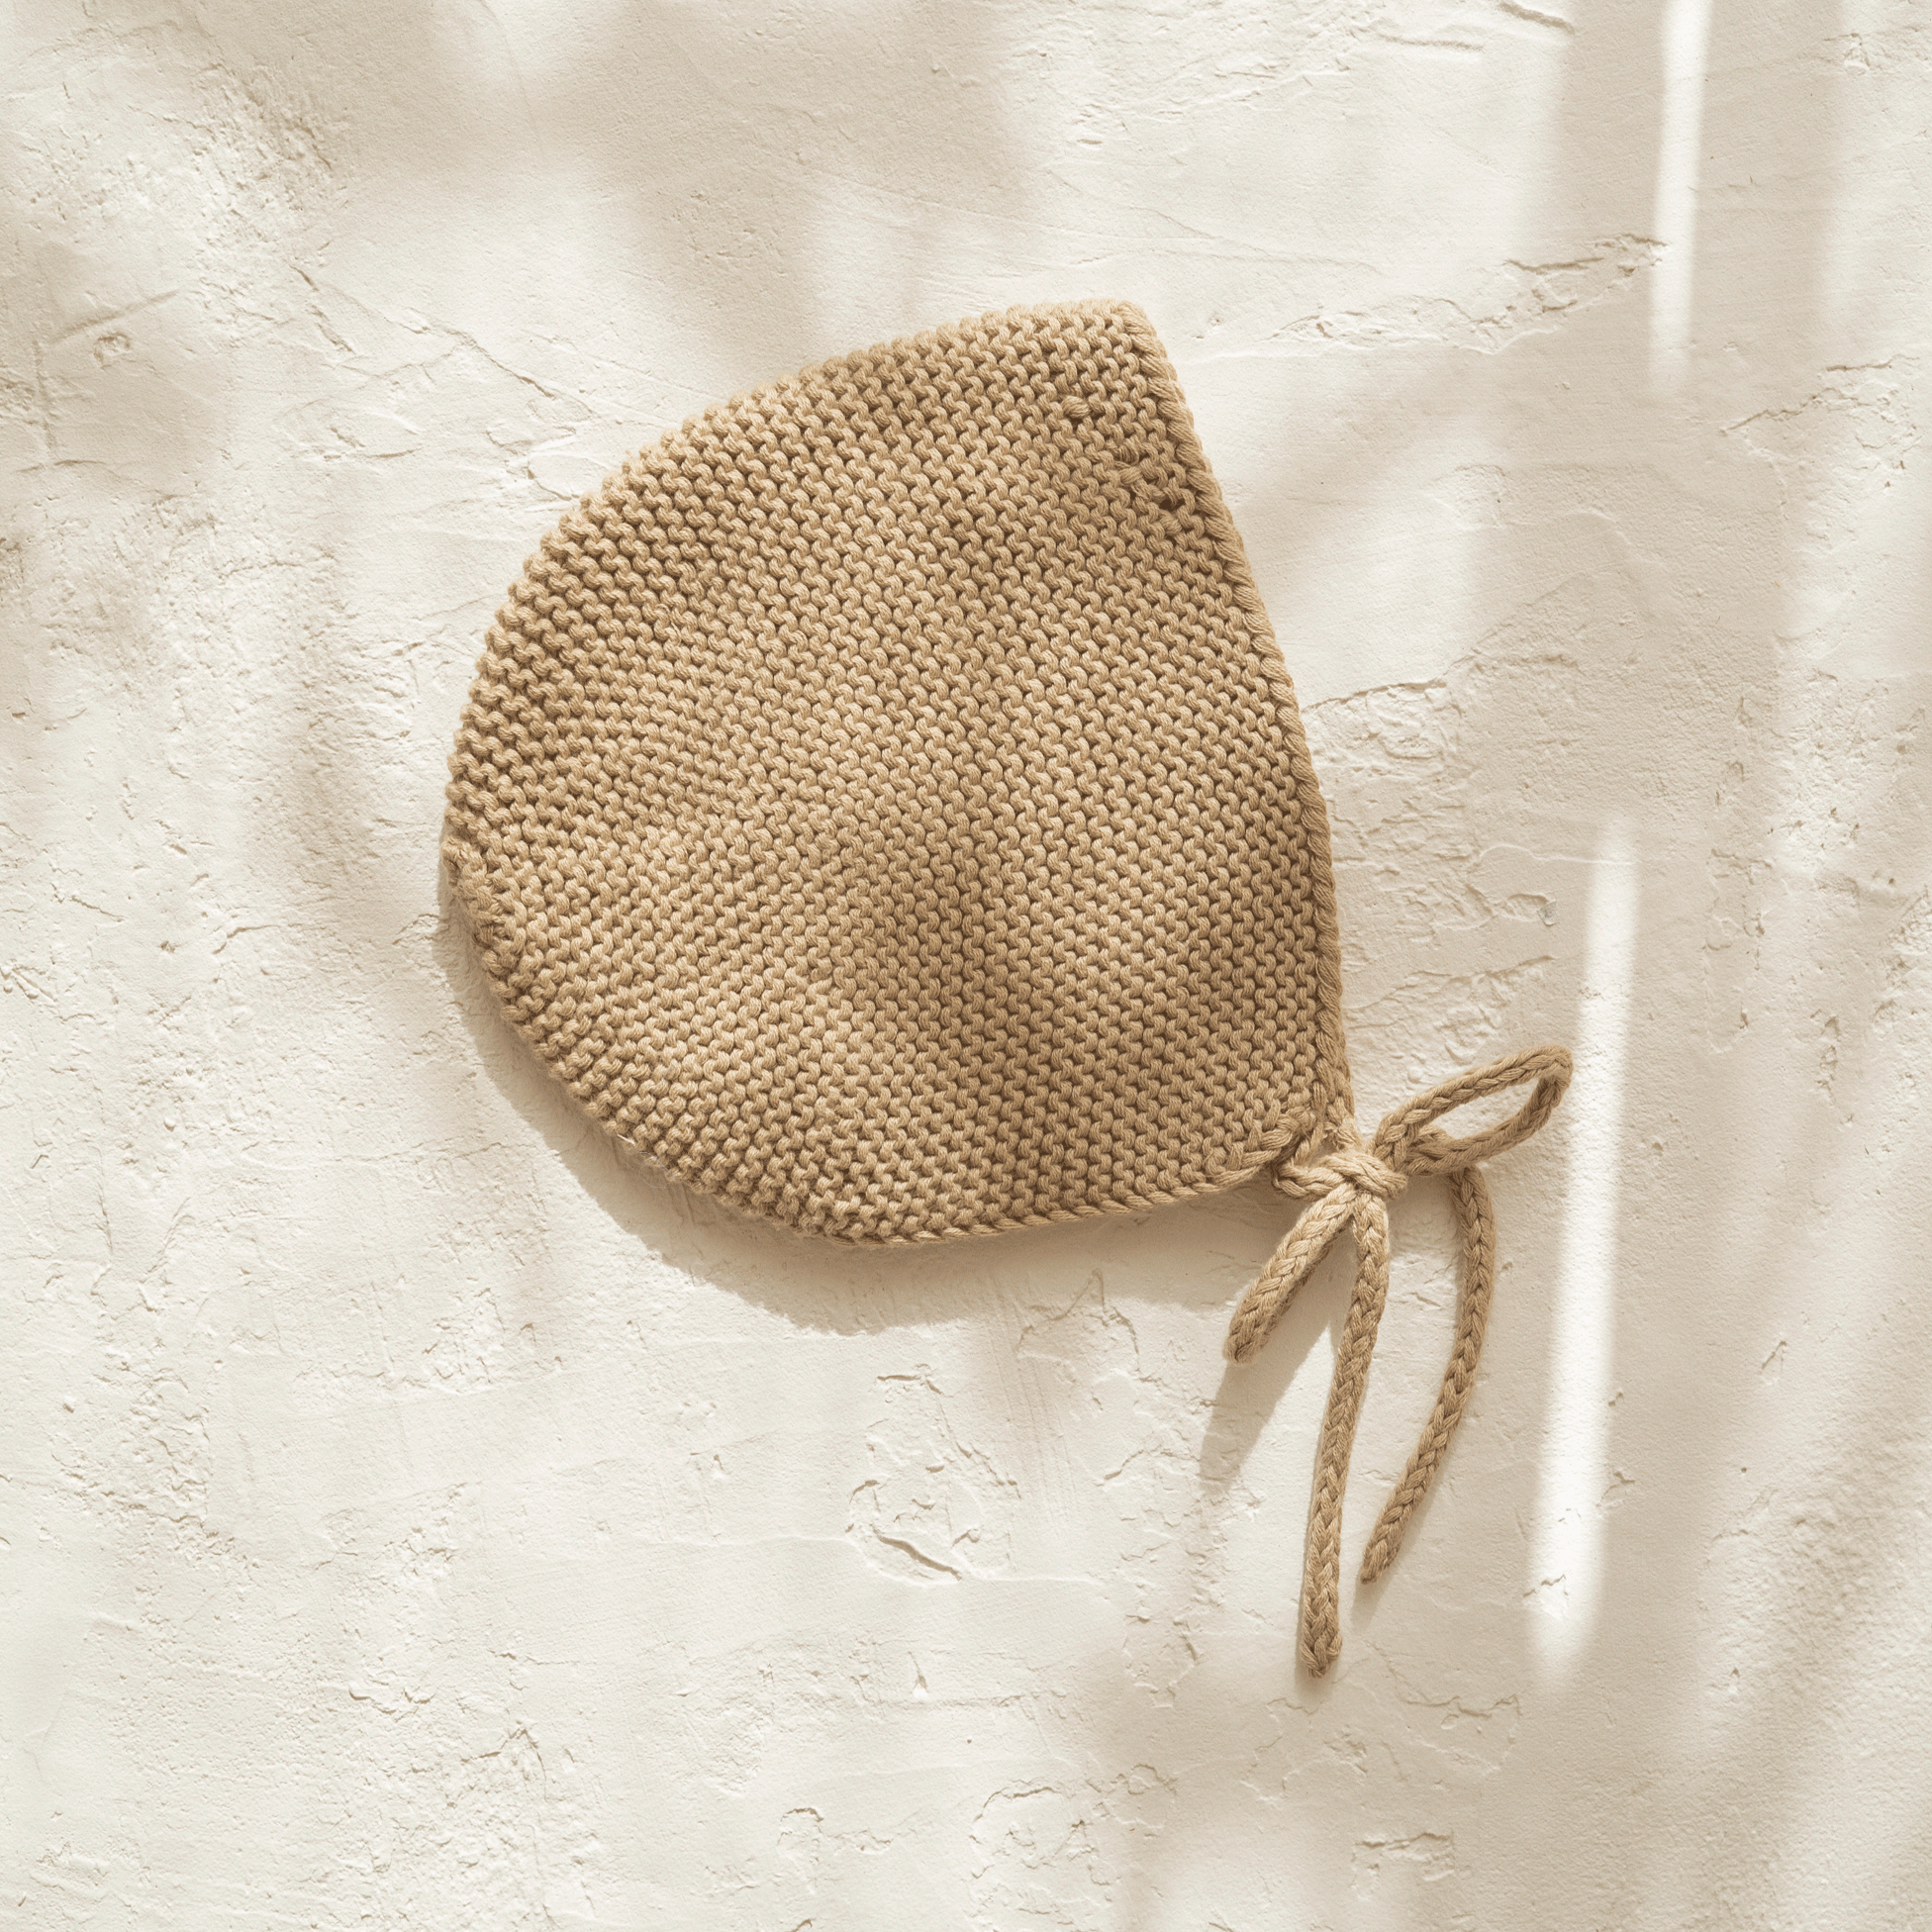 An illoura baby bonnet | olive, made of organic cotton, hanging on a wall.